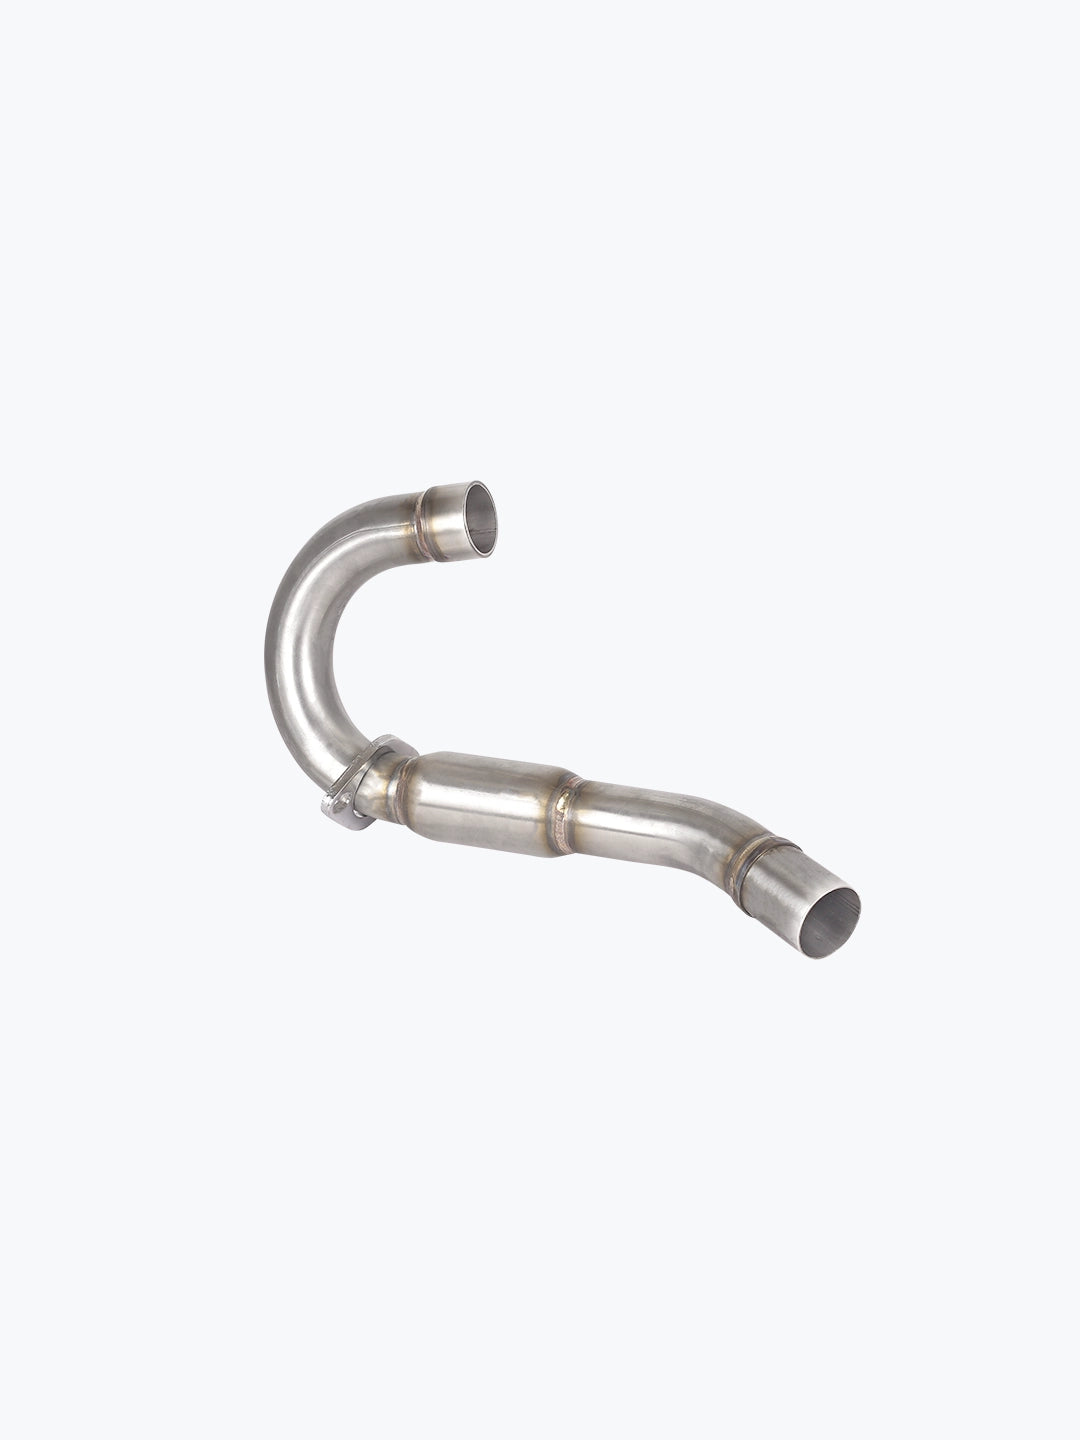 Norifumi Whoops Kompetisi CRF 150L Exhaust